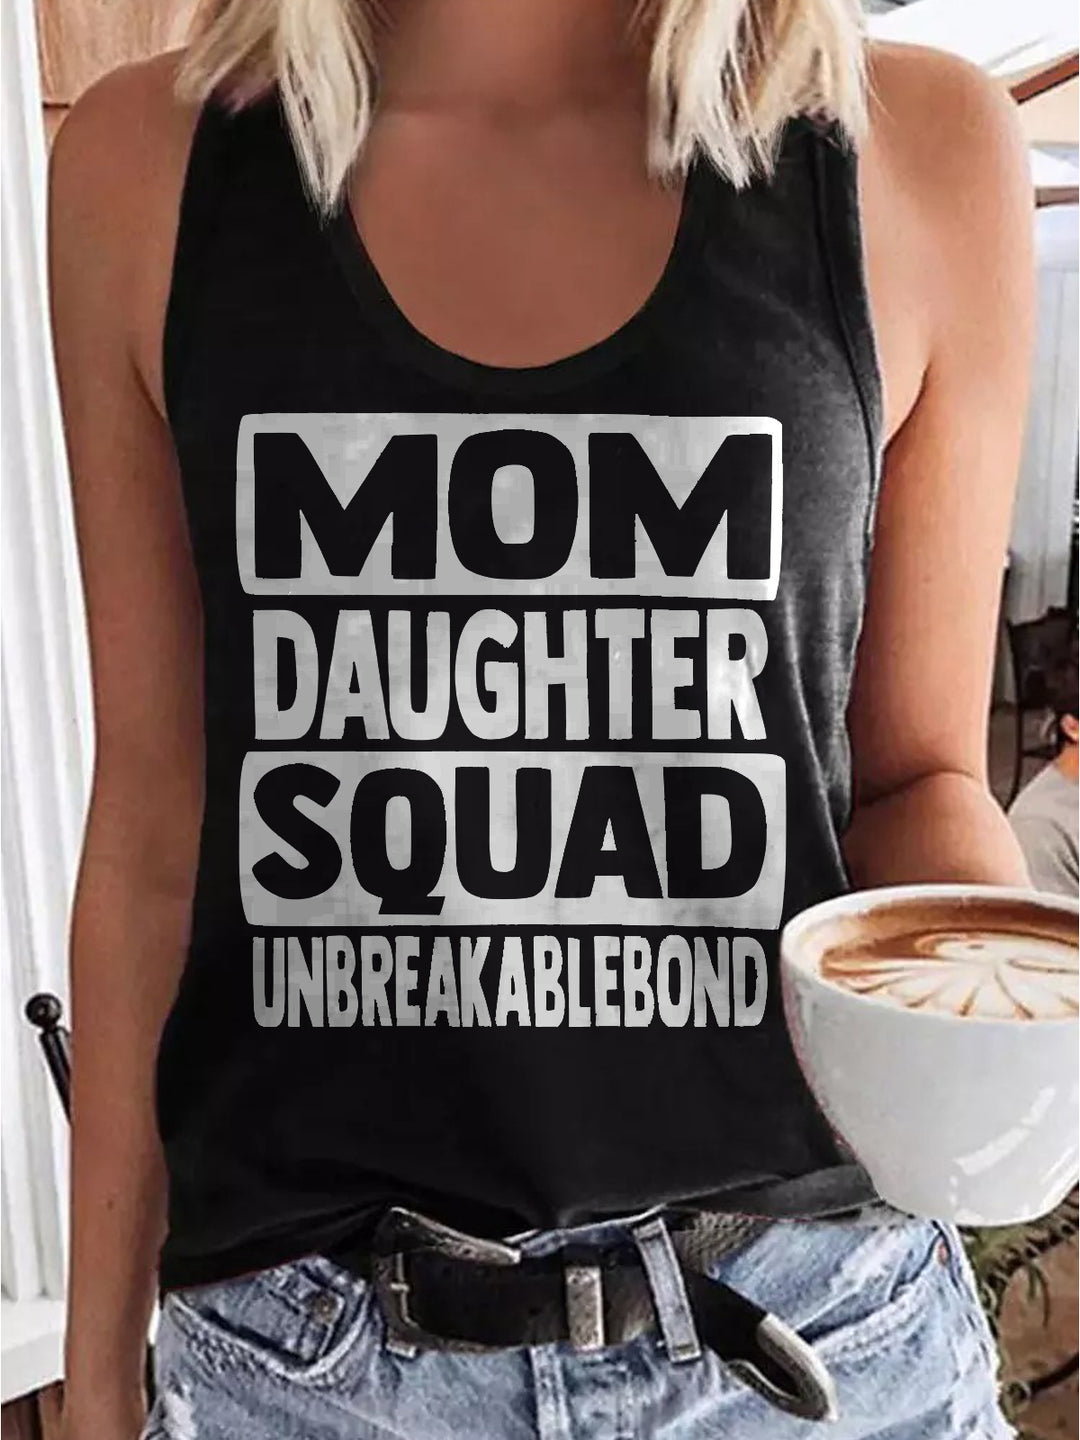 Mom Daughter Squad Unbreakablebound Sleeveless Top